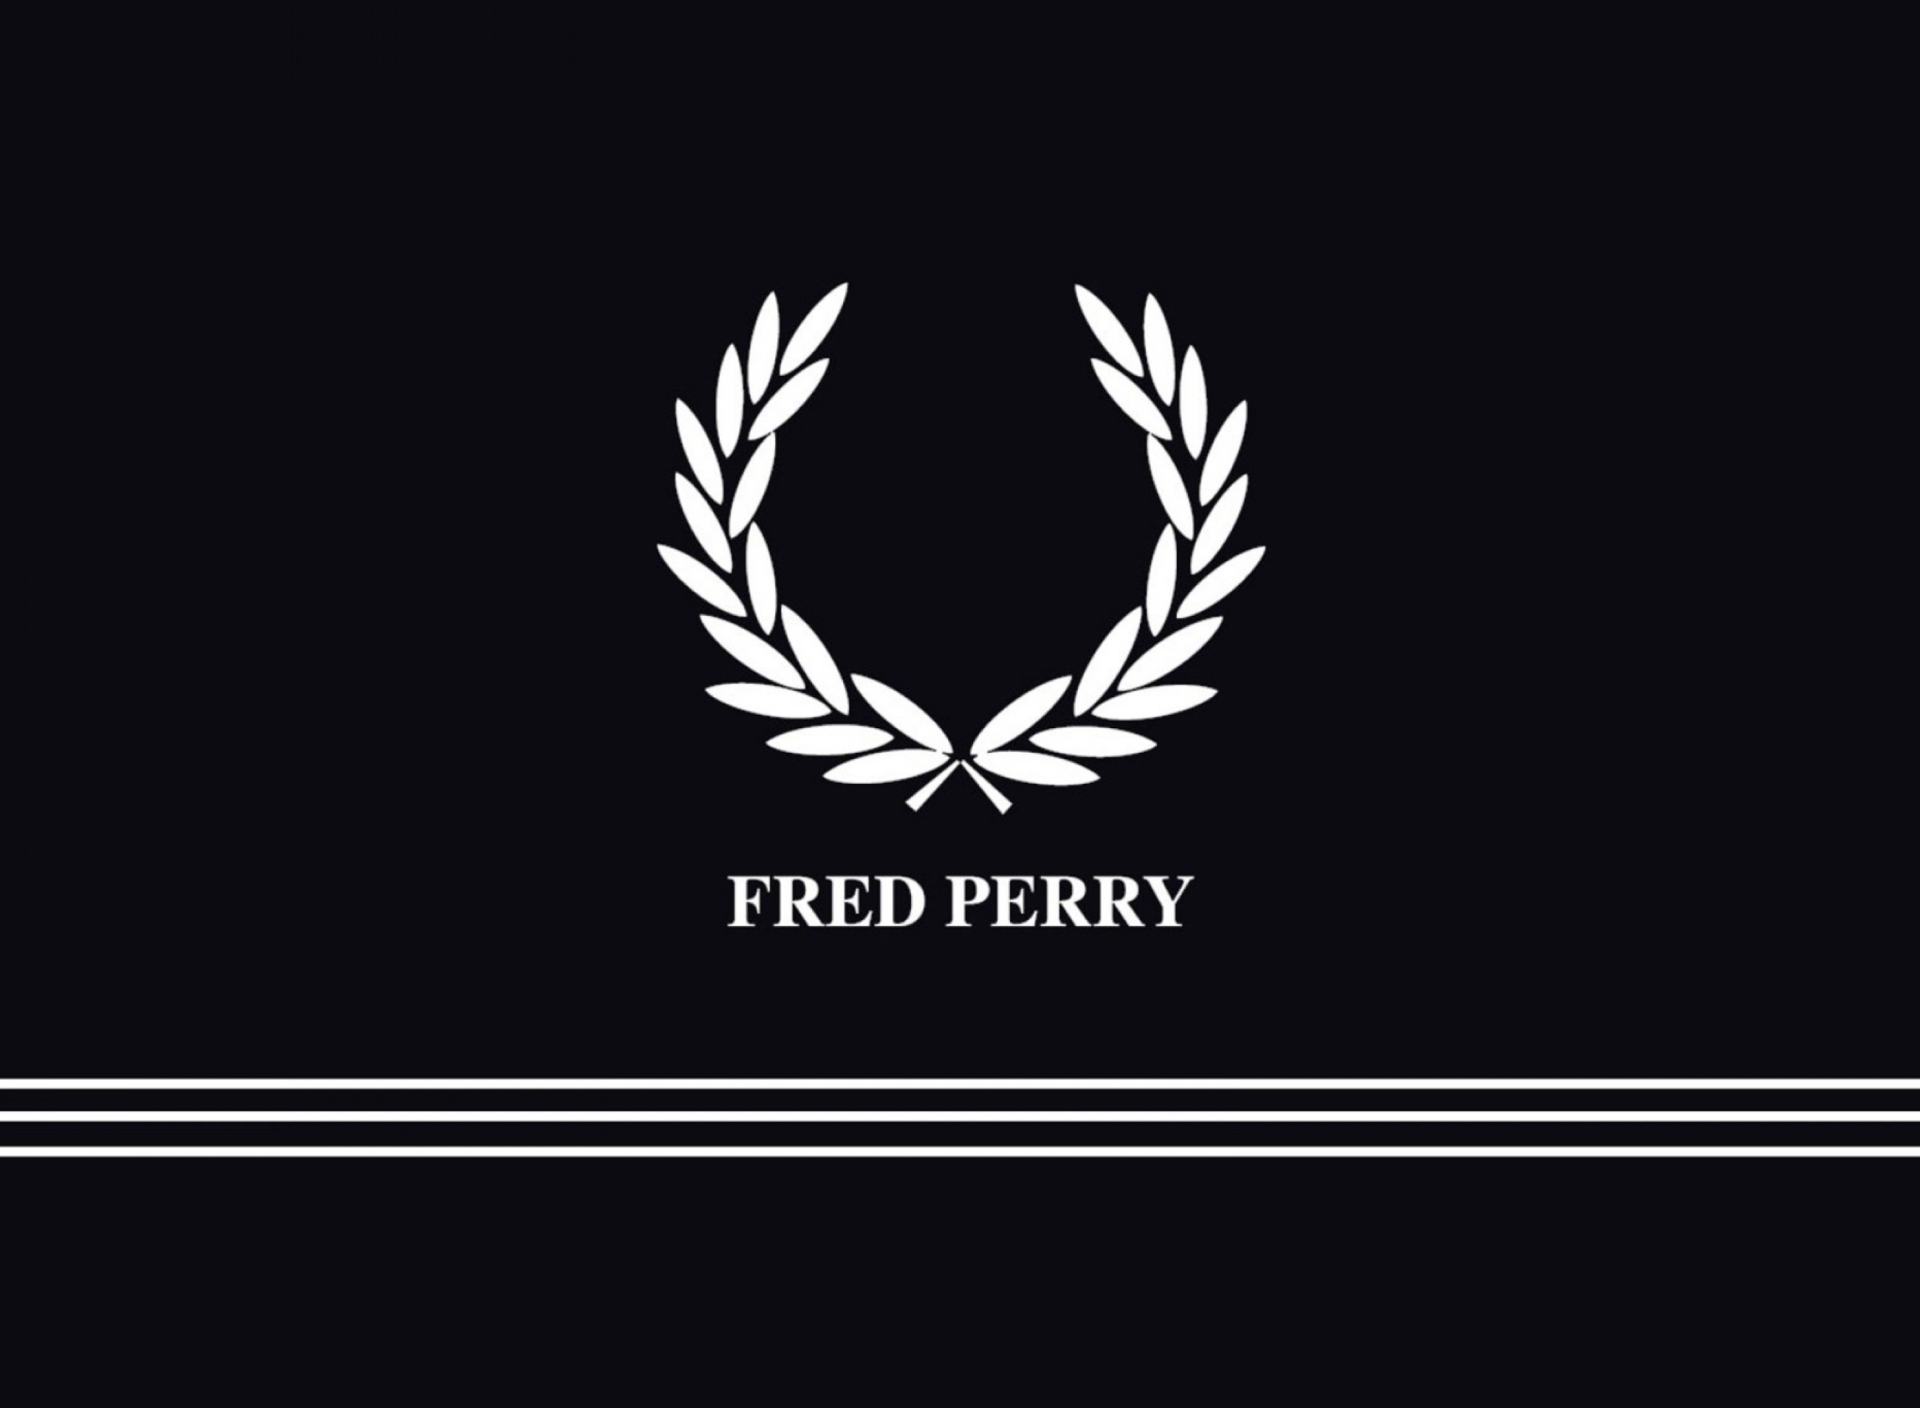 Fred Perry wallpaper 1920x1408